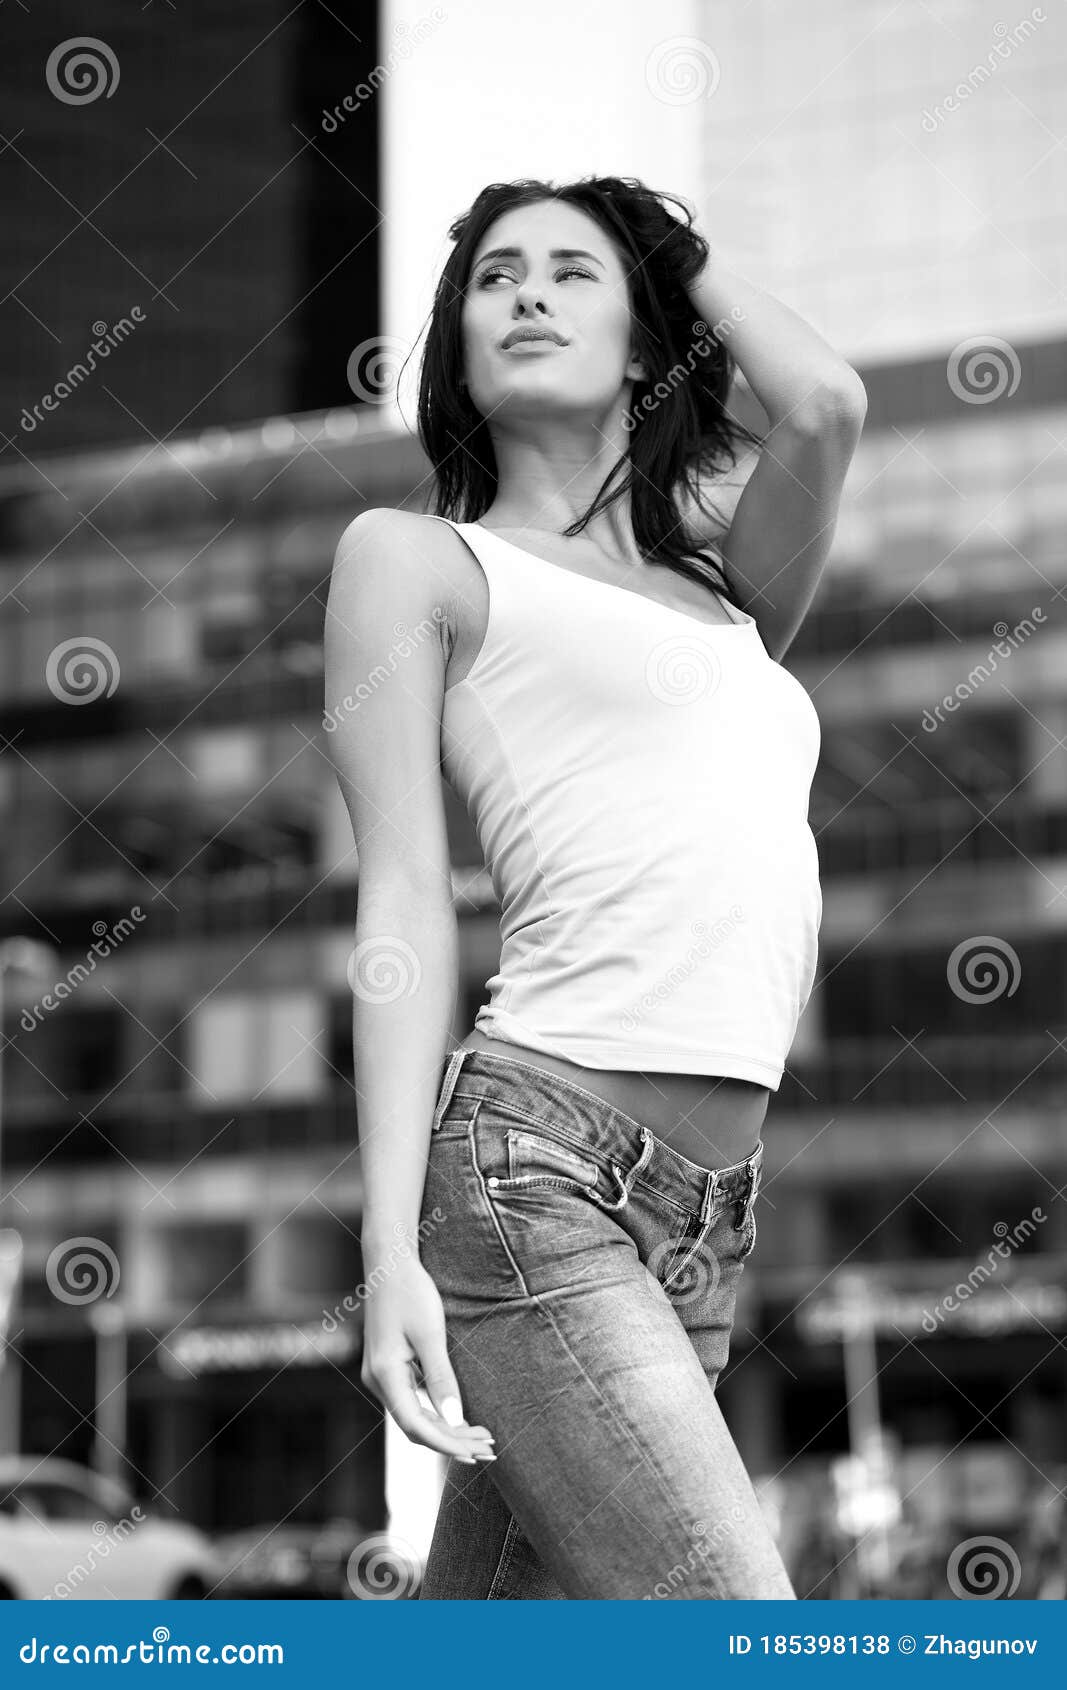 Young Girl In Jeans Posing Outdoors Stock Photo - Image of people ...